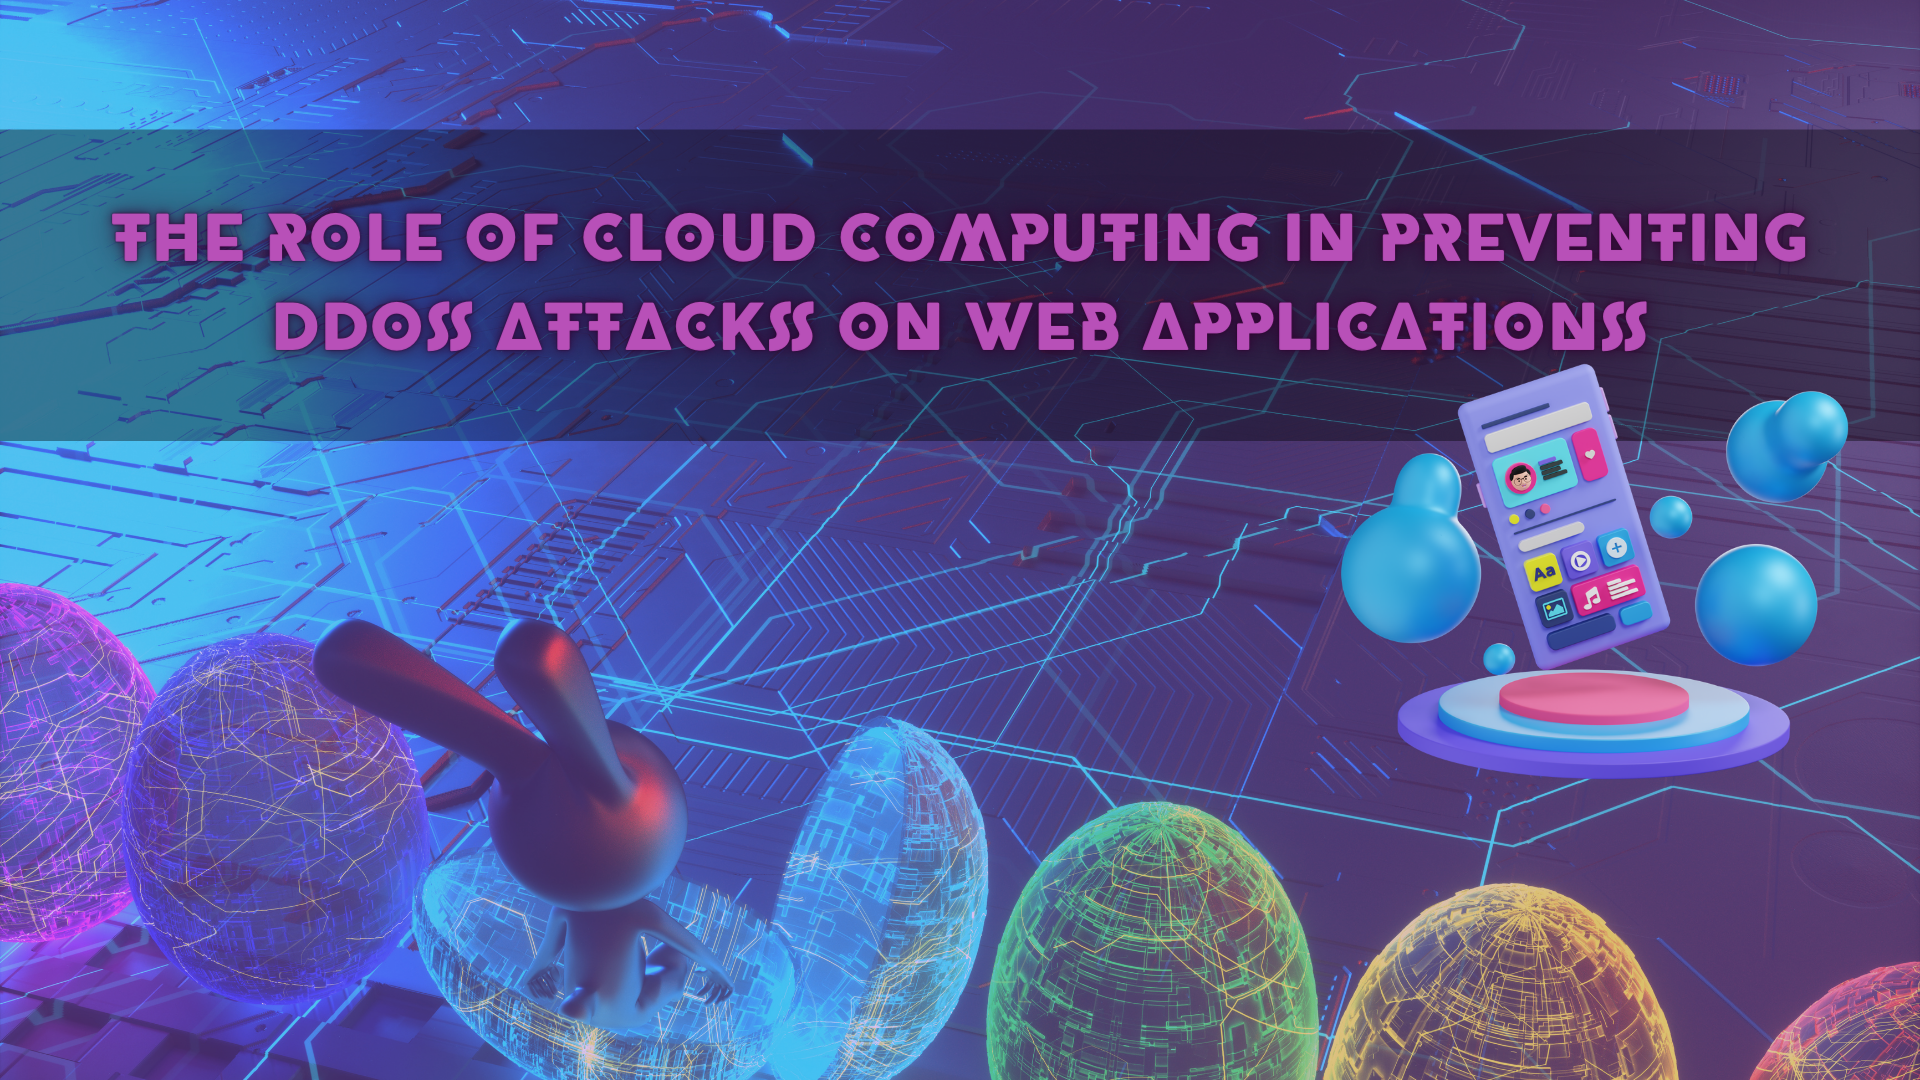 The Role of Cloud Computing in Preventing DDoS Attacks on Web Applications